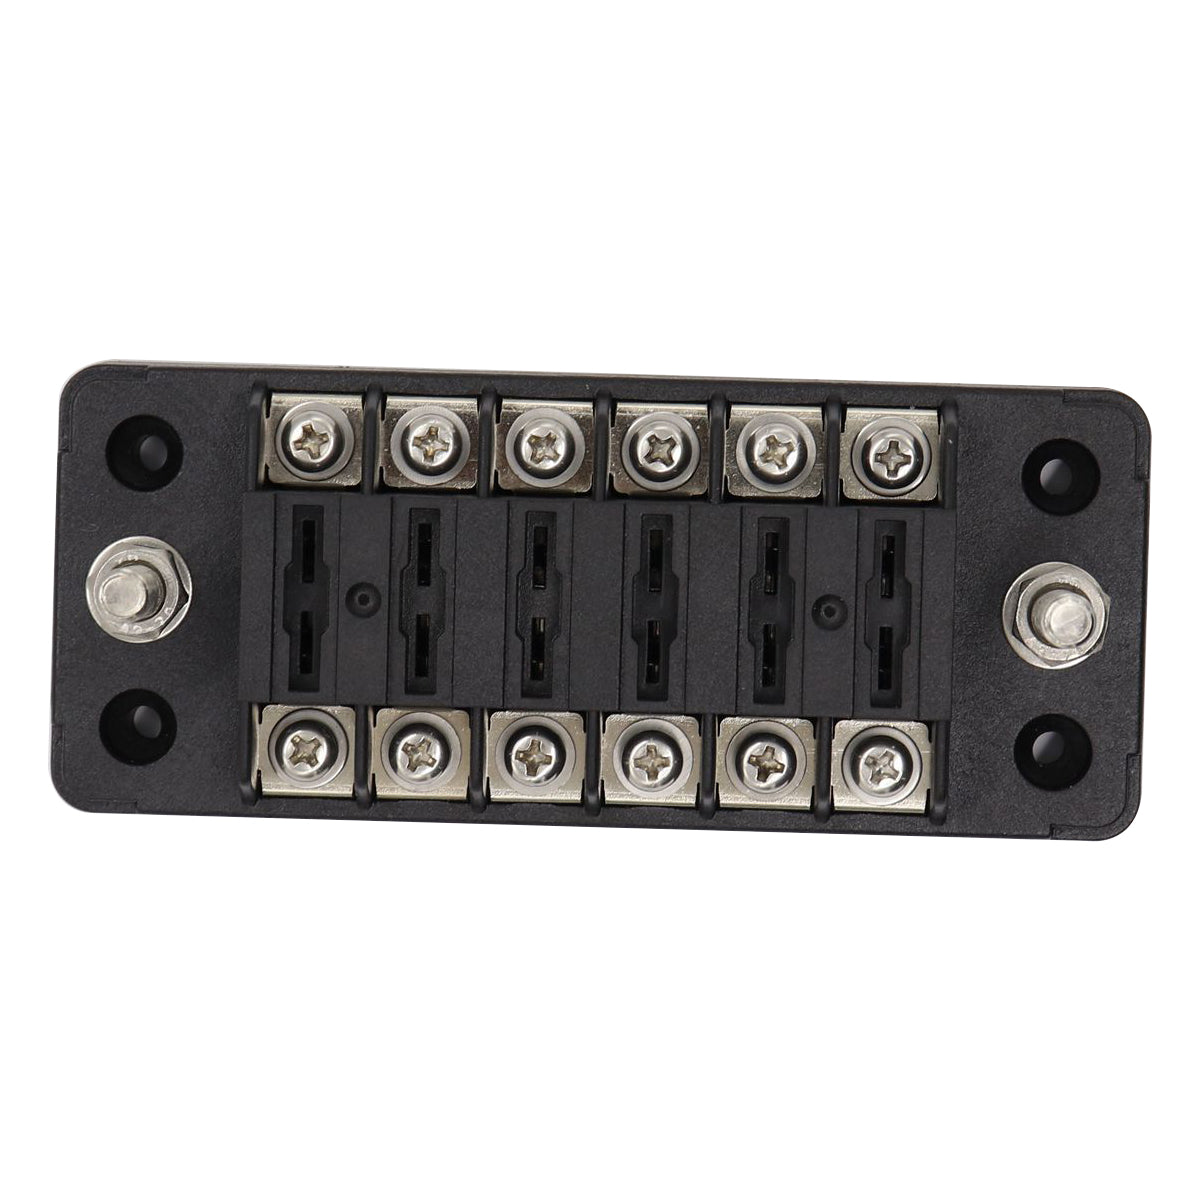 Dark Slate Gray 75A Circuit Fuse Block With Negative Bus 6 Way Fuse Box Ground Negative for Bus Car Boat Marine Auto